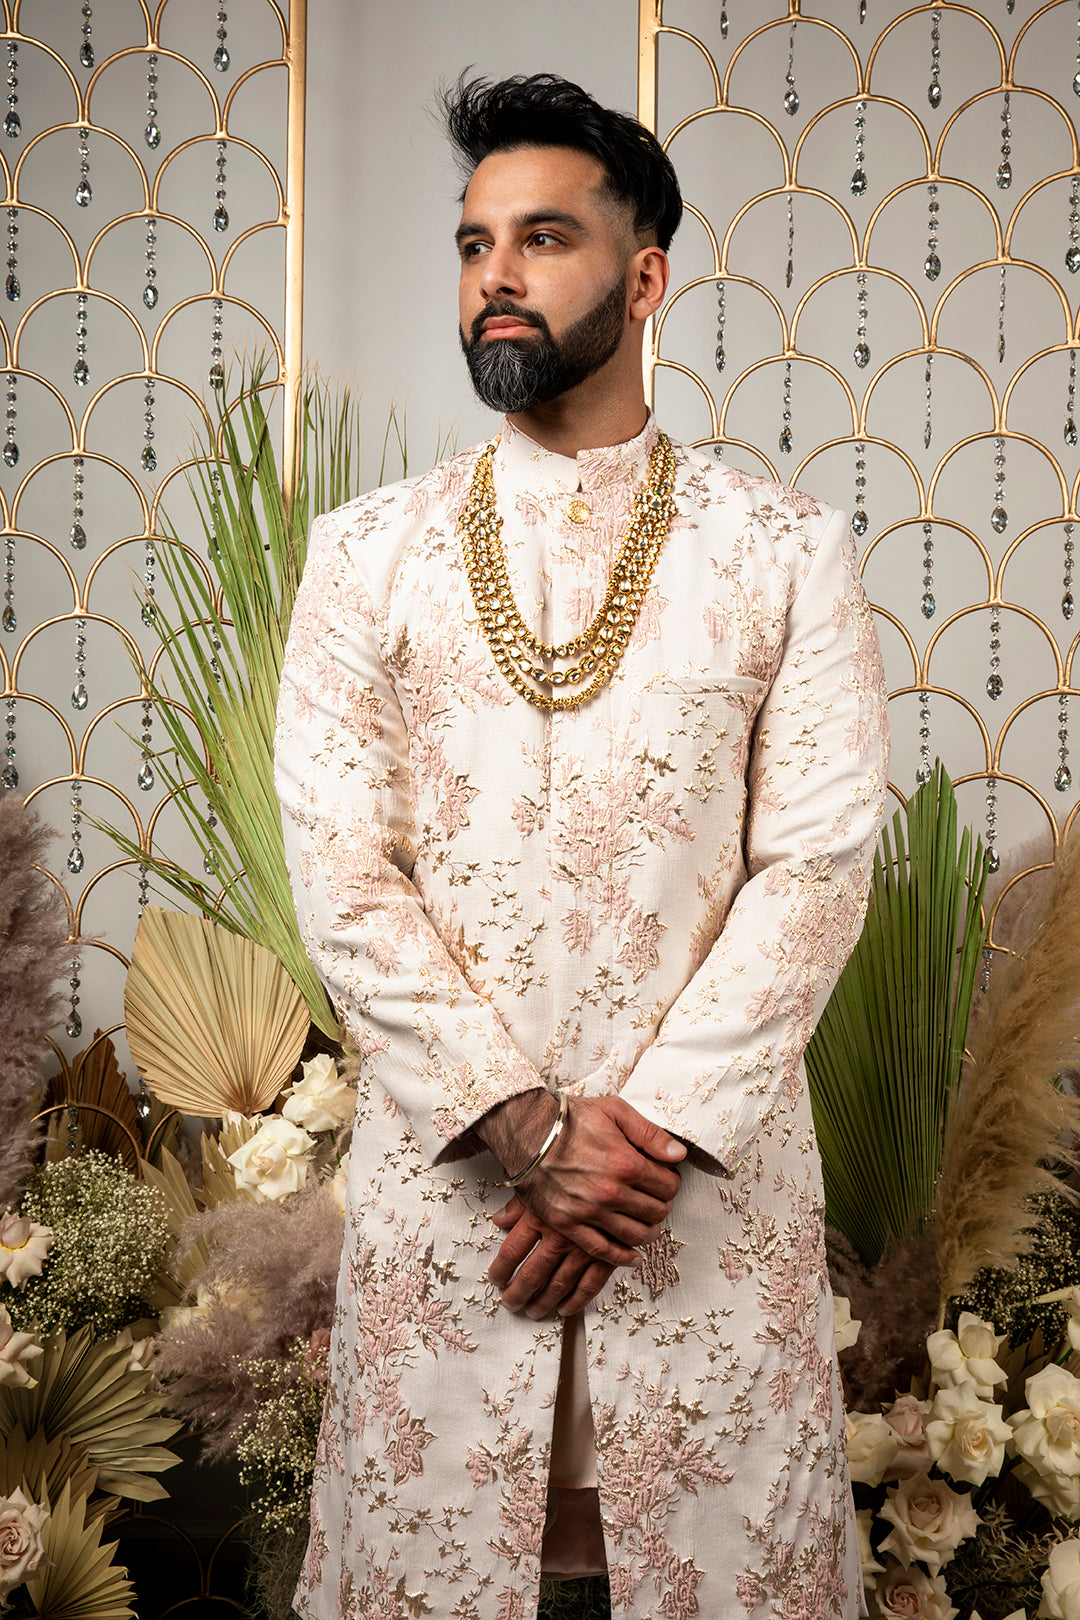 front view- man wearing PARK Blush-Gold Floral Jacquard Sherwani Jacket in front of a gold and floral background with layered necklaces